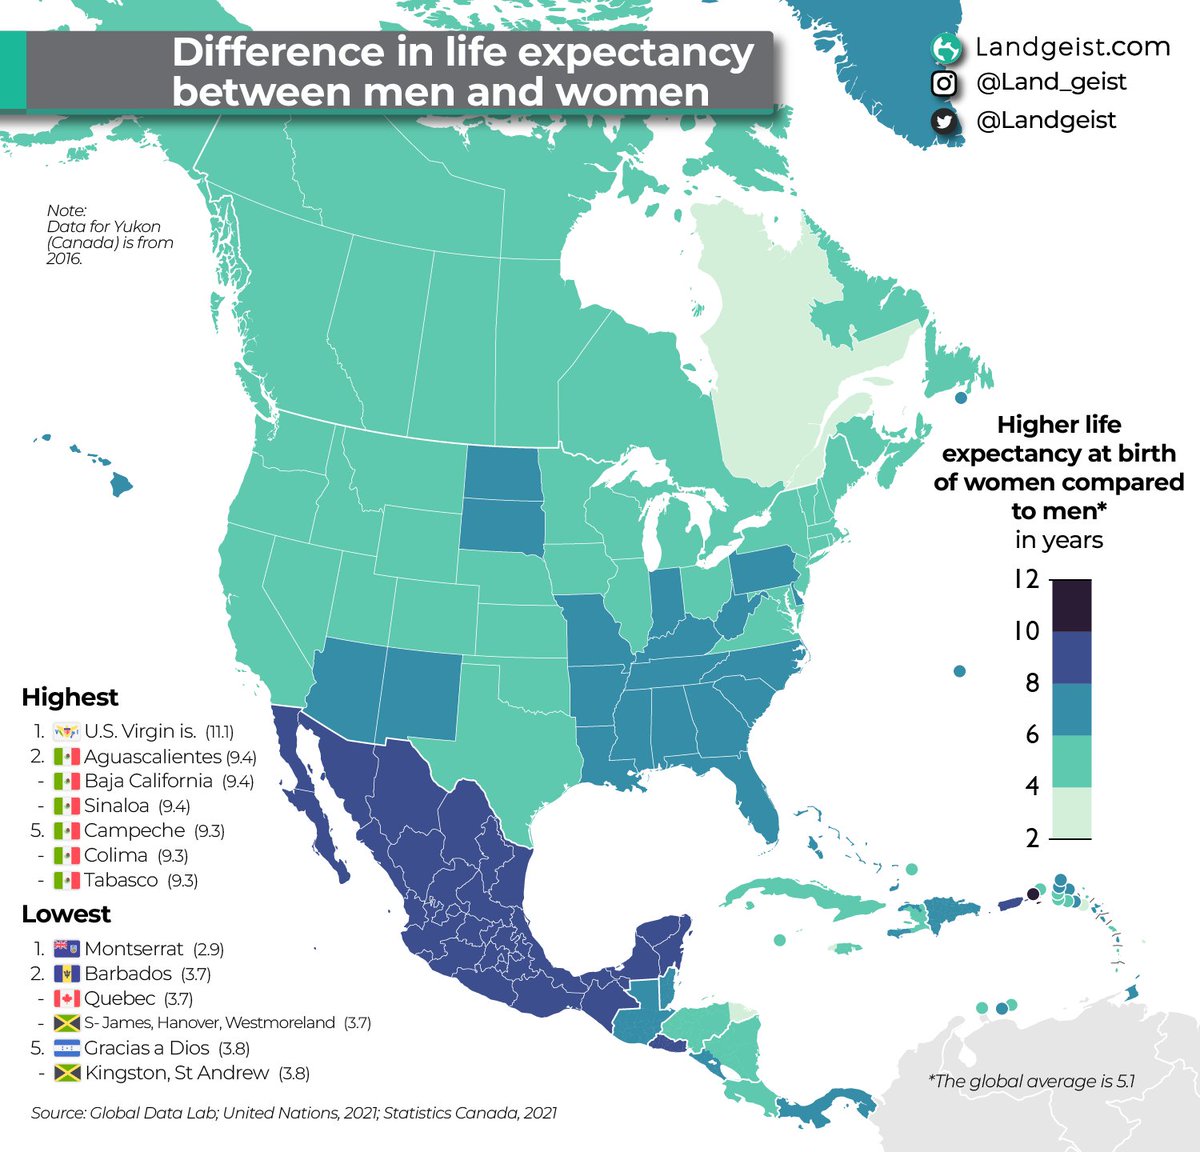 Difference in life expectancy at birth between men and women in North America Full article: landgeist.com/2024/03/19/dif… #maps #GIS #dataviz #GeoSpatial #Spatial